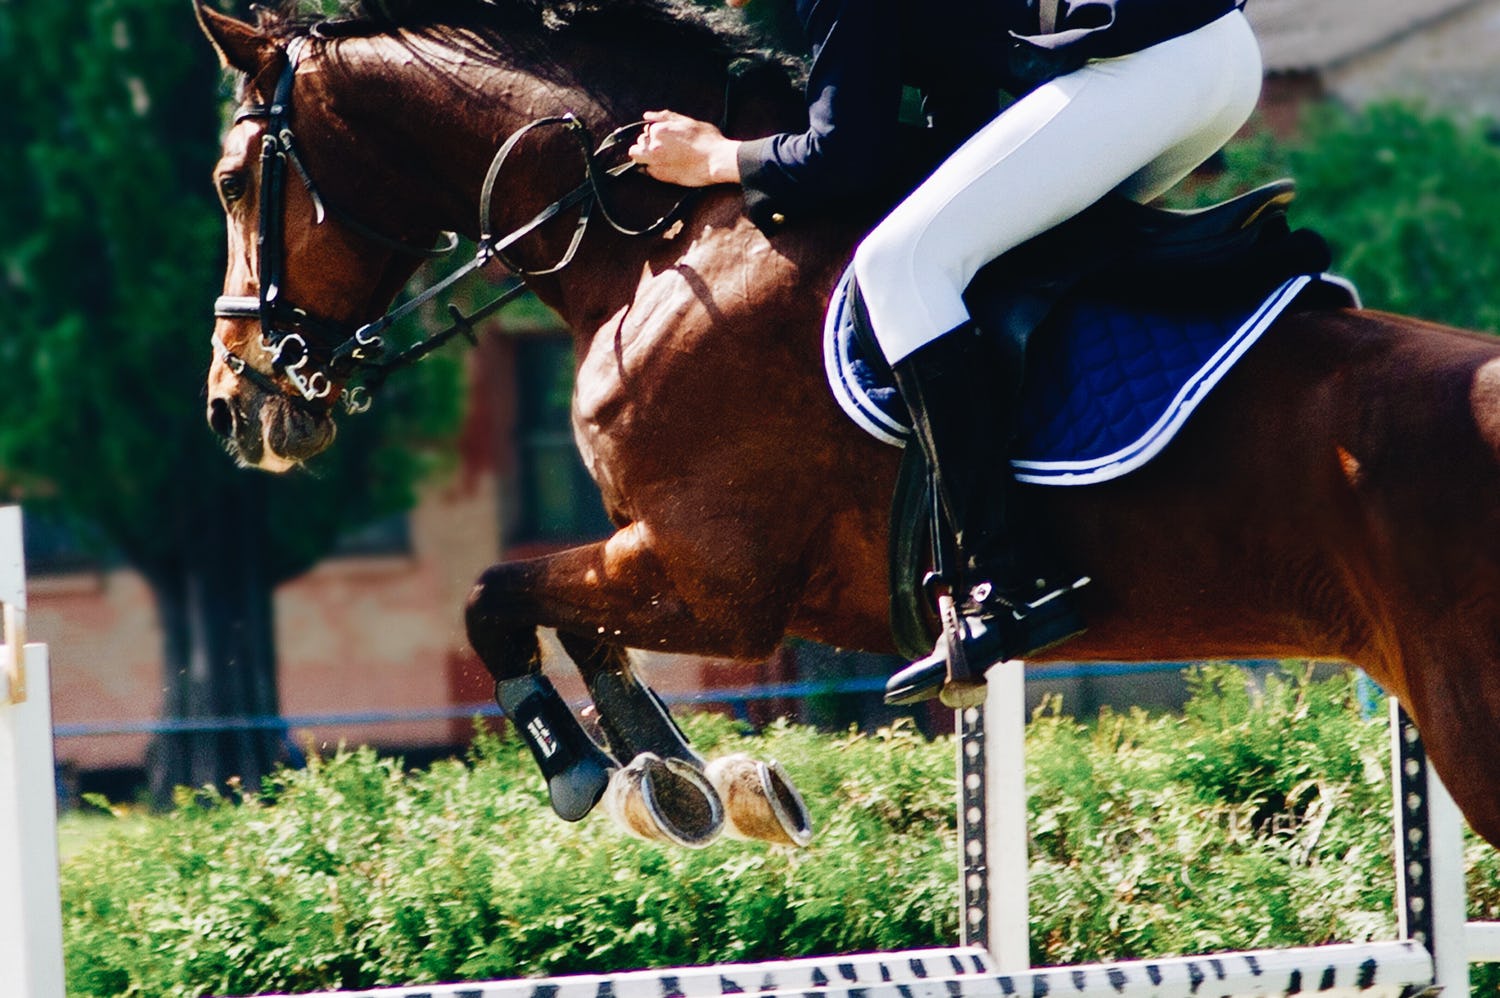 Resolve stands out from the crowd with a revolutionary marketing campaign at the Jumping de Sion show jumping event